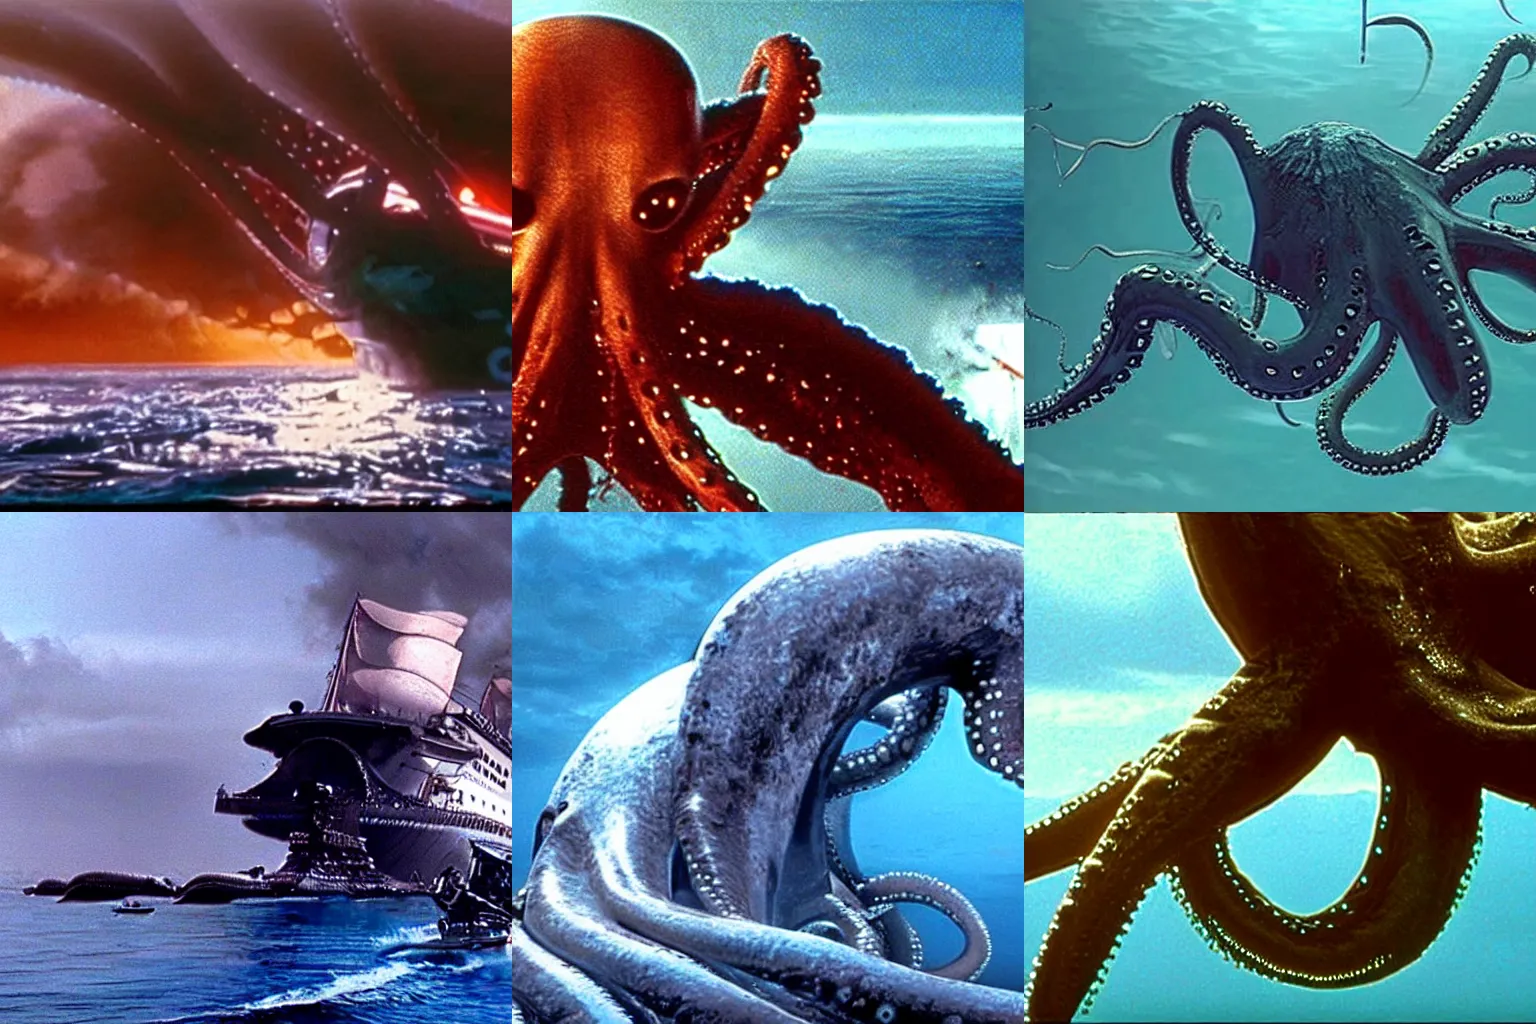 Prompt: screenshot from a James Cameron movie showing a giant octopus attacking an ocean liner